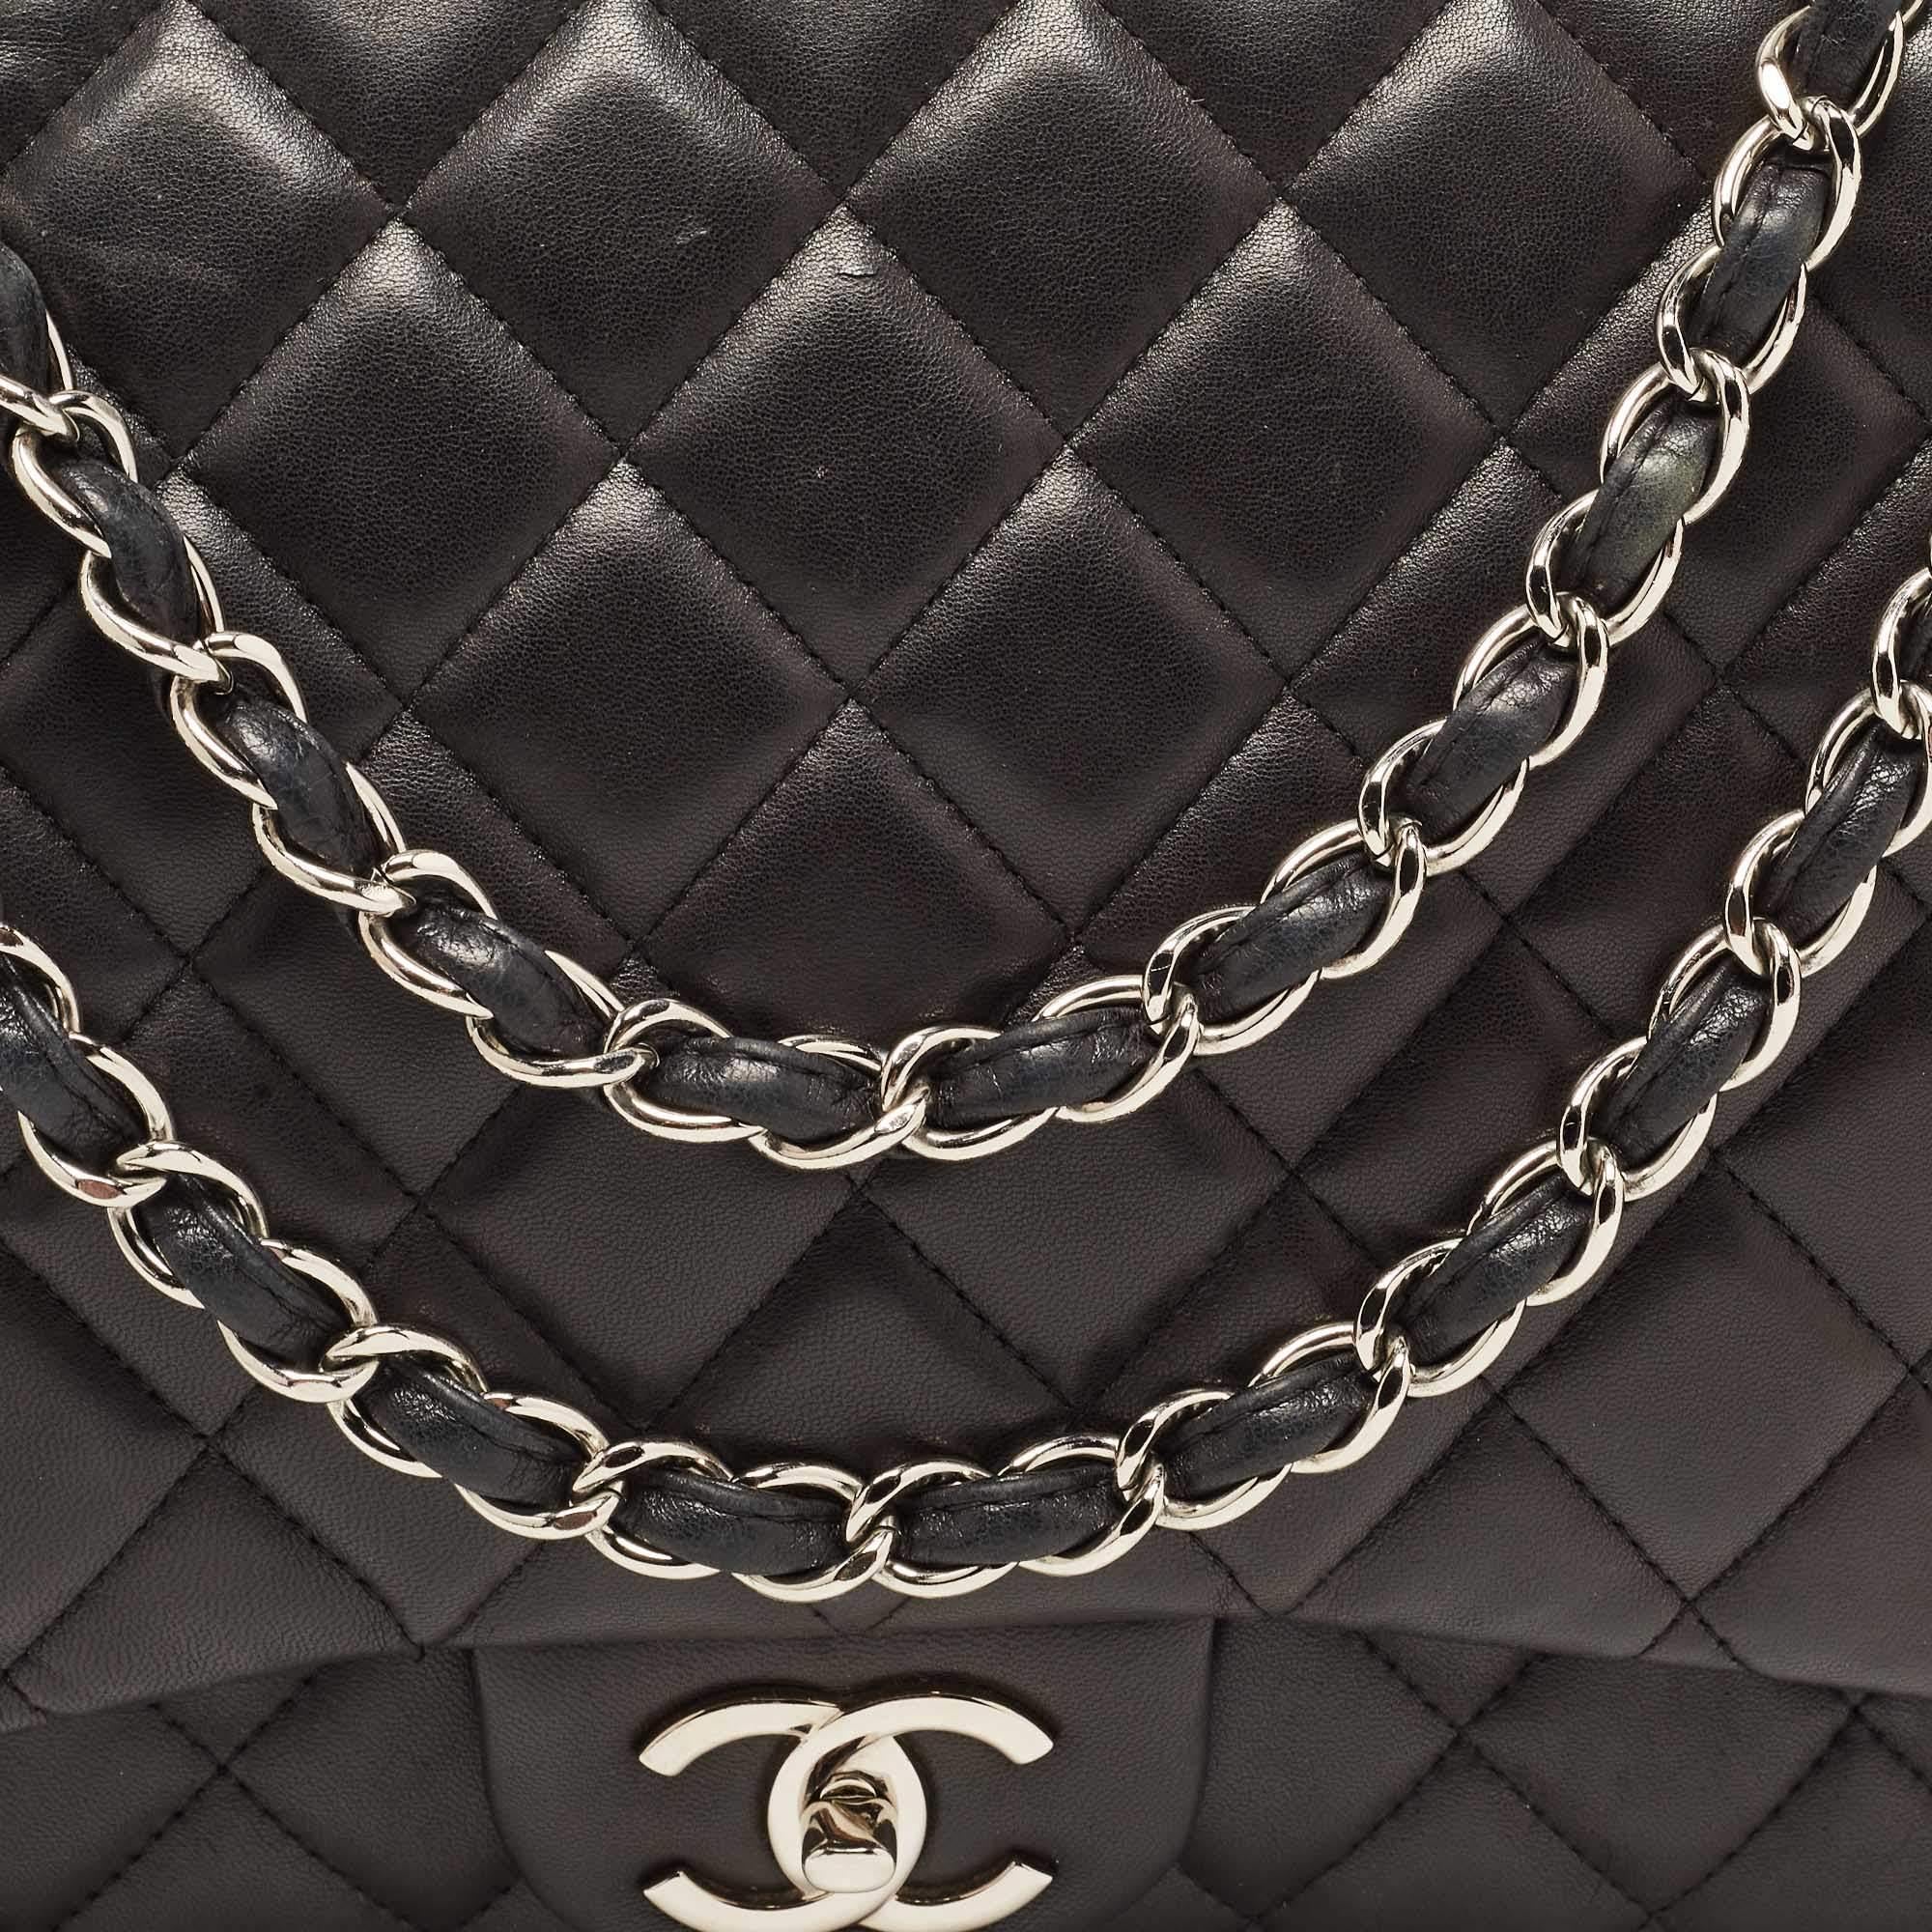 Reimagined season after season, the classic designs from Chanel manages to retain their classic glamour and noteworthy silhouettes. From one of the most celebrated collections, this Double Flap bag is enriched with historic details and functional